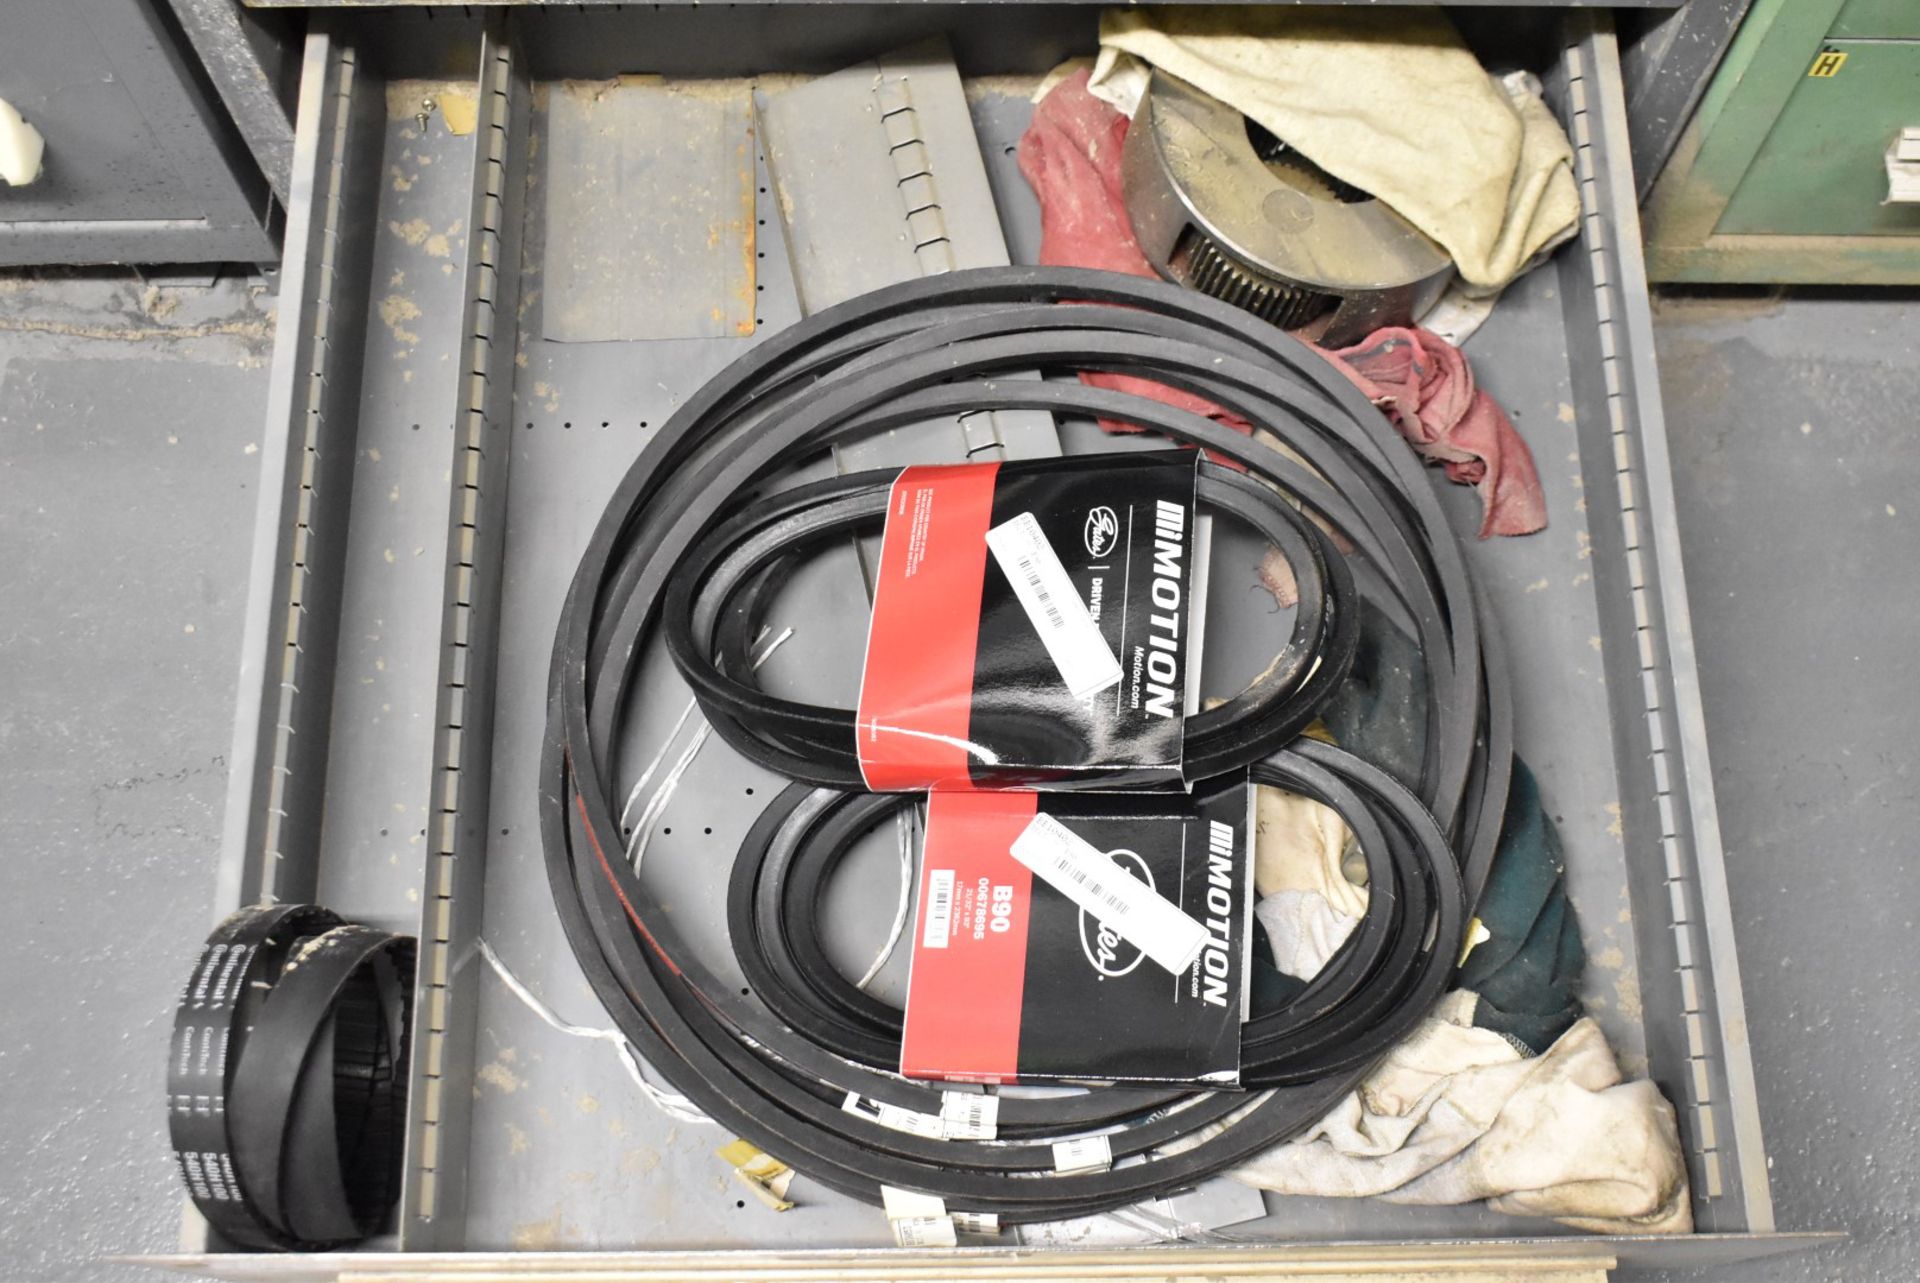 LOT/ CONTENTS OF CABINET - INCLUDING O-RINGS, BUSHINGS, SPROCKETS, BELTS, SPARE PARTS (TOOL - Image 5 of 5